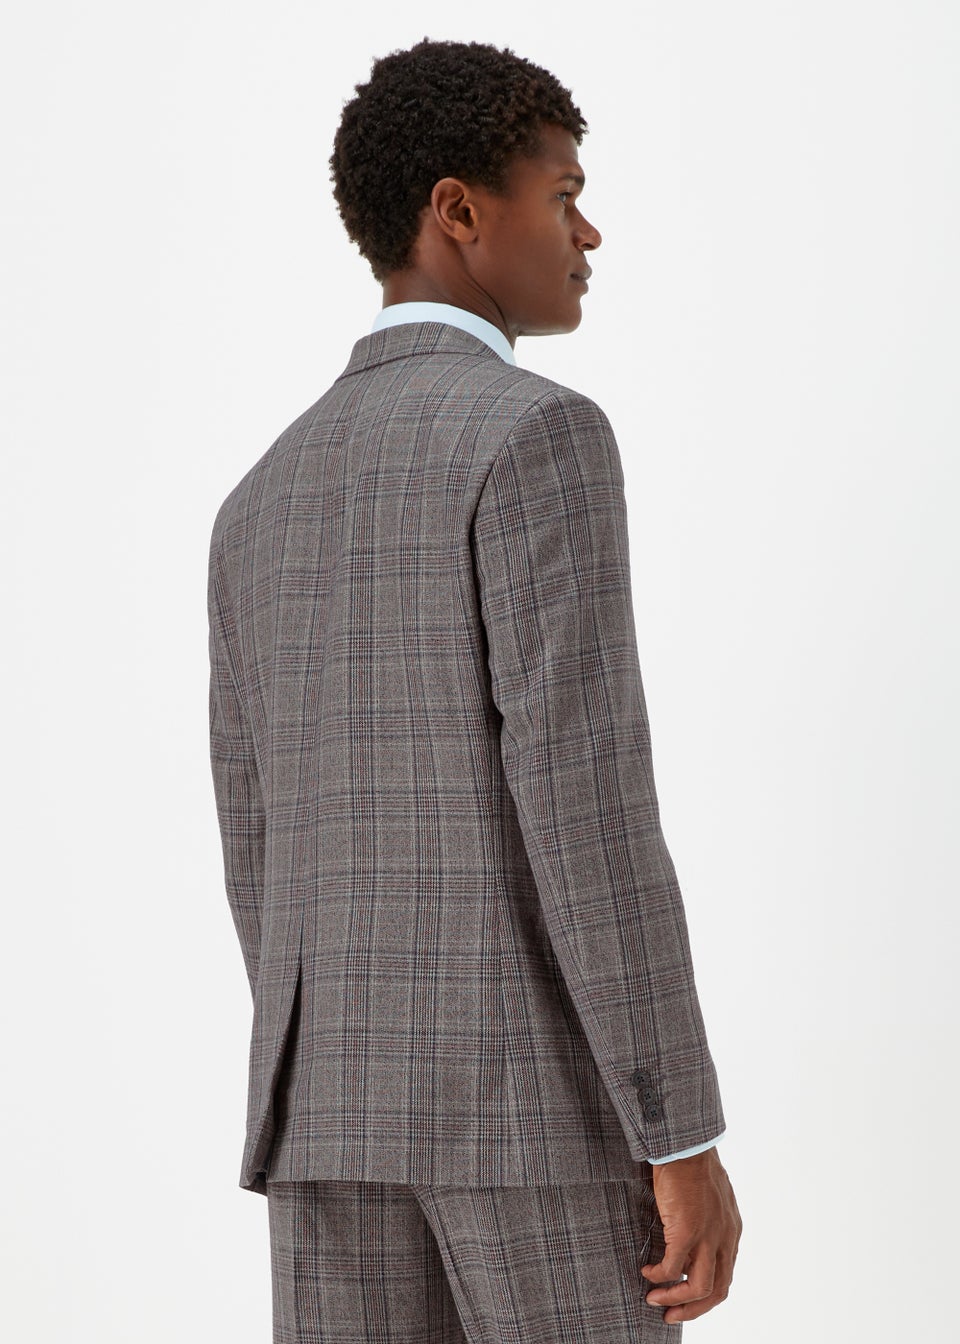 Taylor & Wright Lambeth Charcoal Check Tailored Fit Suit Jacket